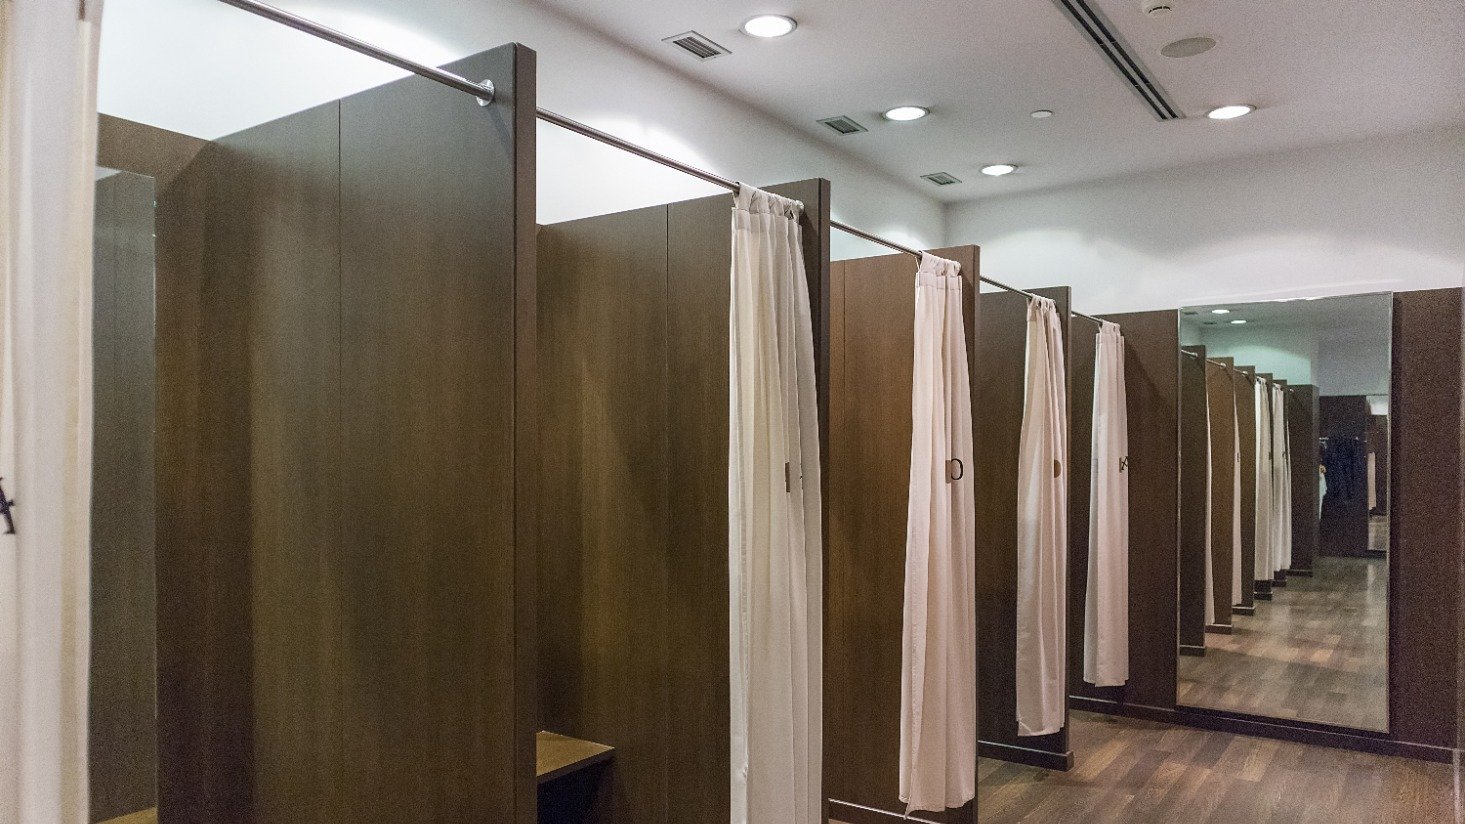 Cleaning and air quality recommendations for fitting rooms